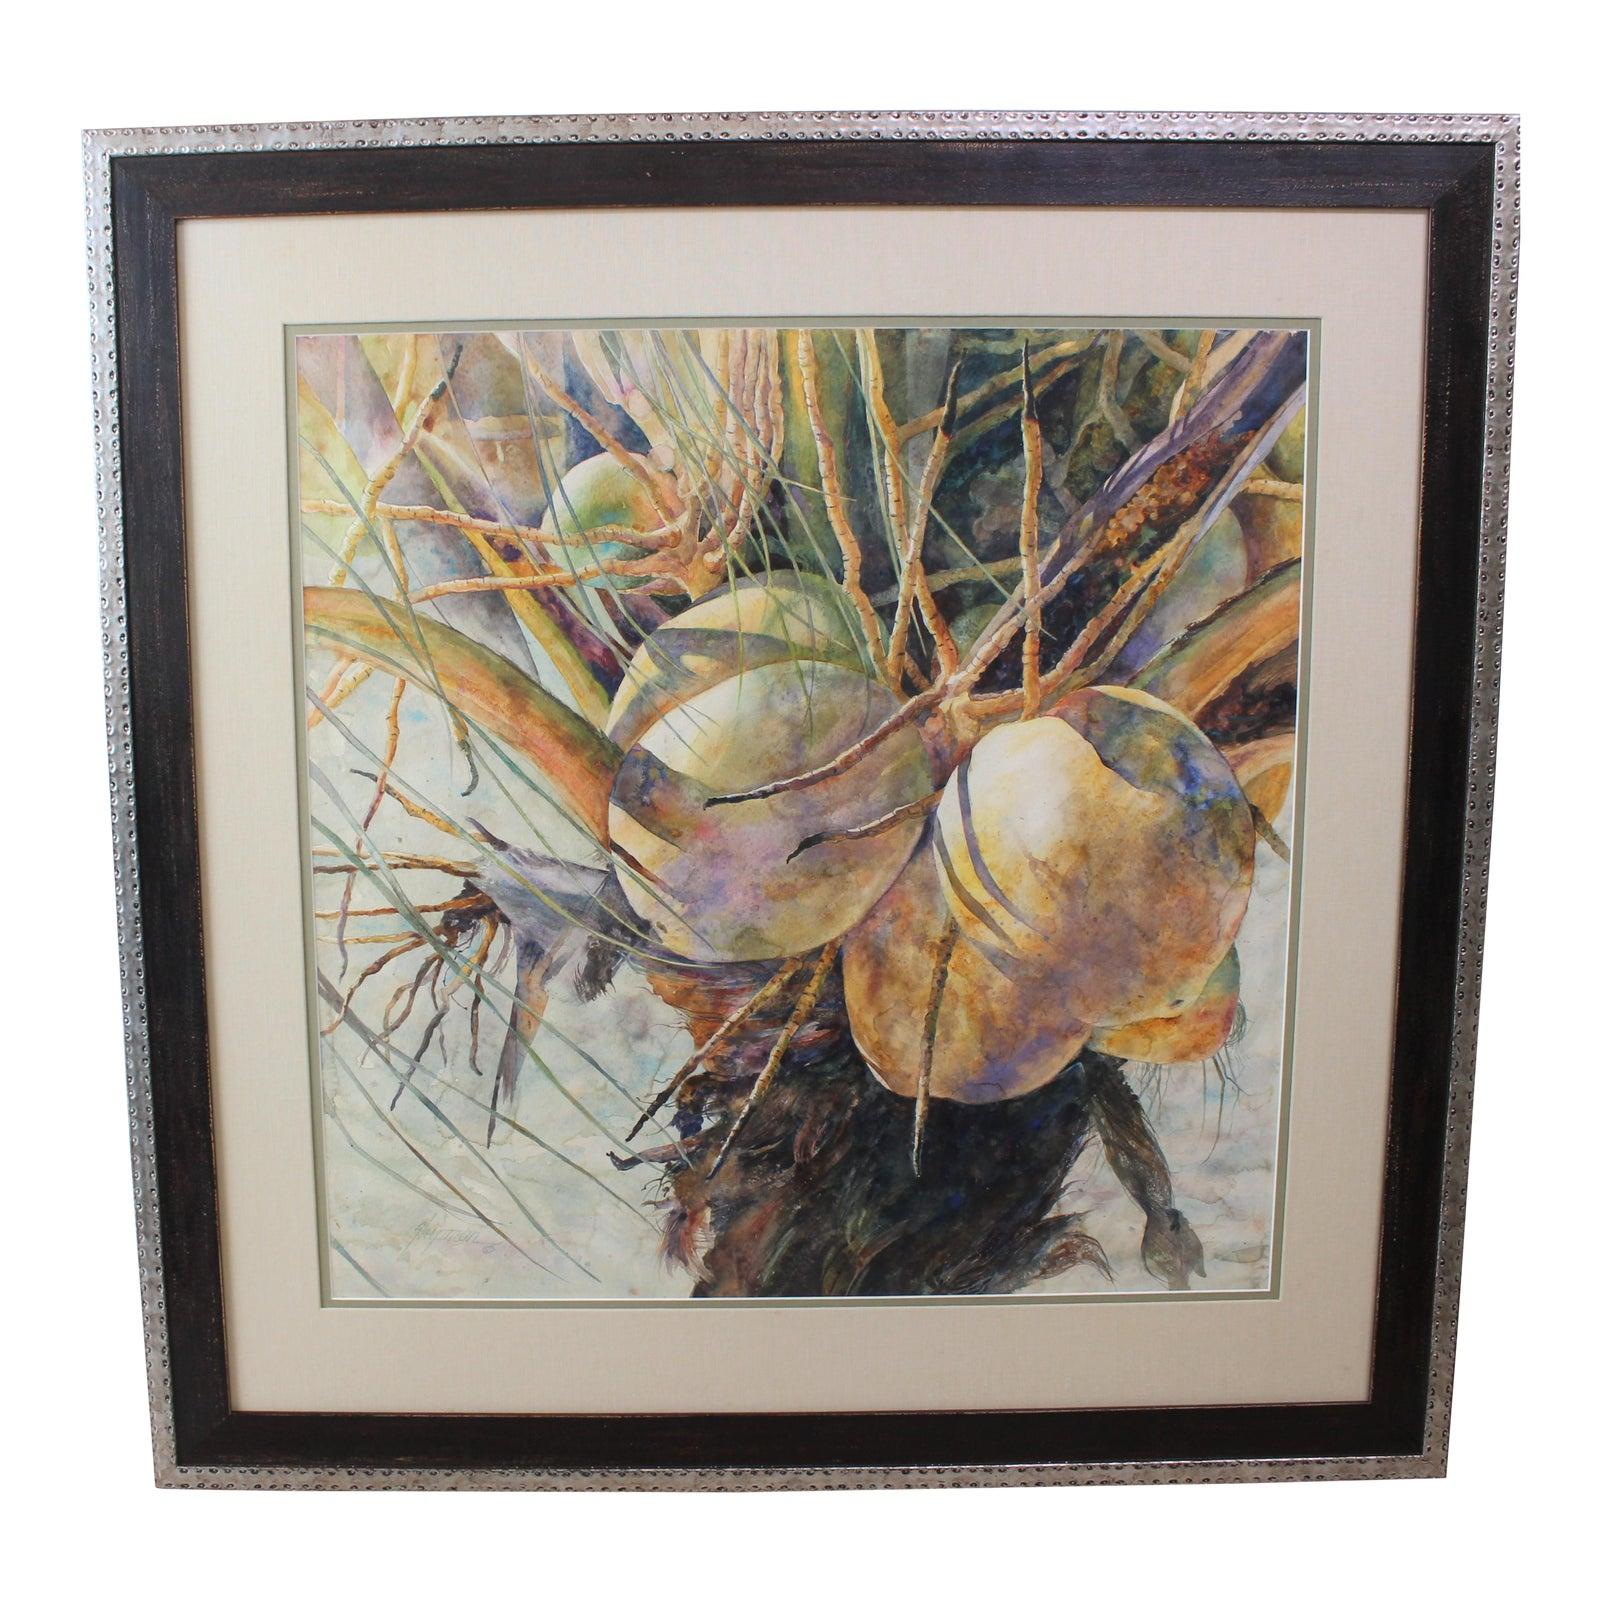 Barbara Shipman Watercolor Painting "Lots of Coconuts" For Sale